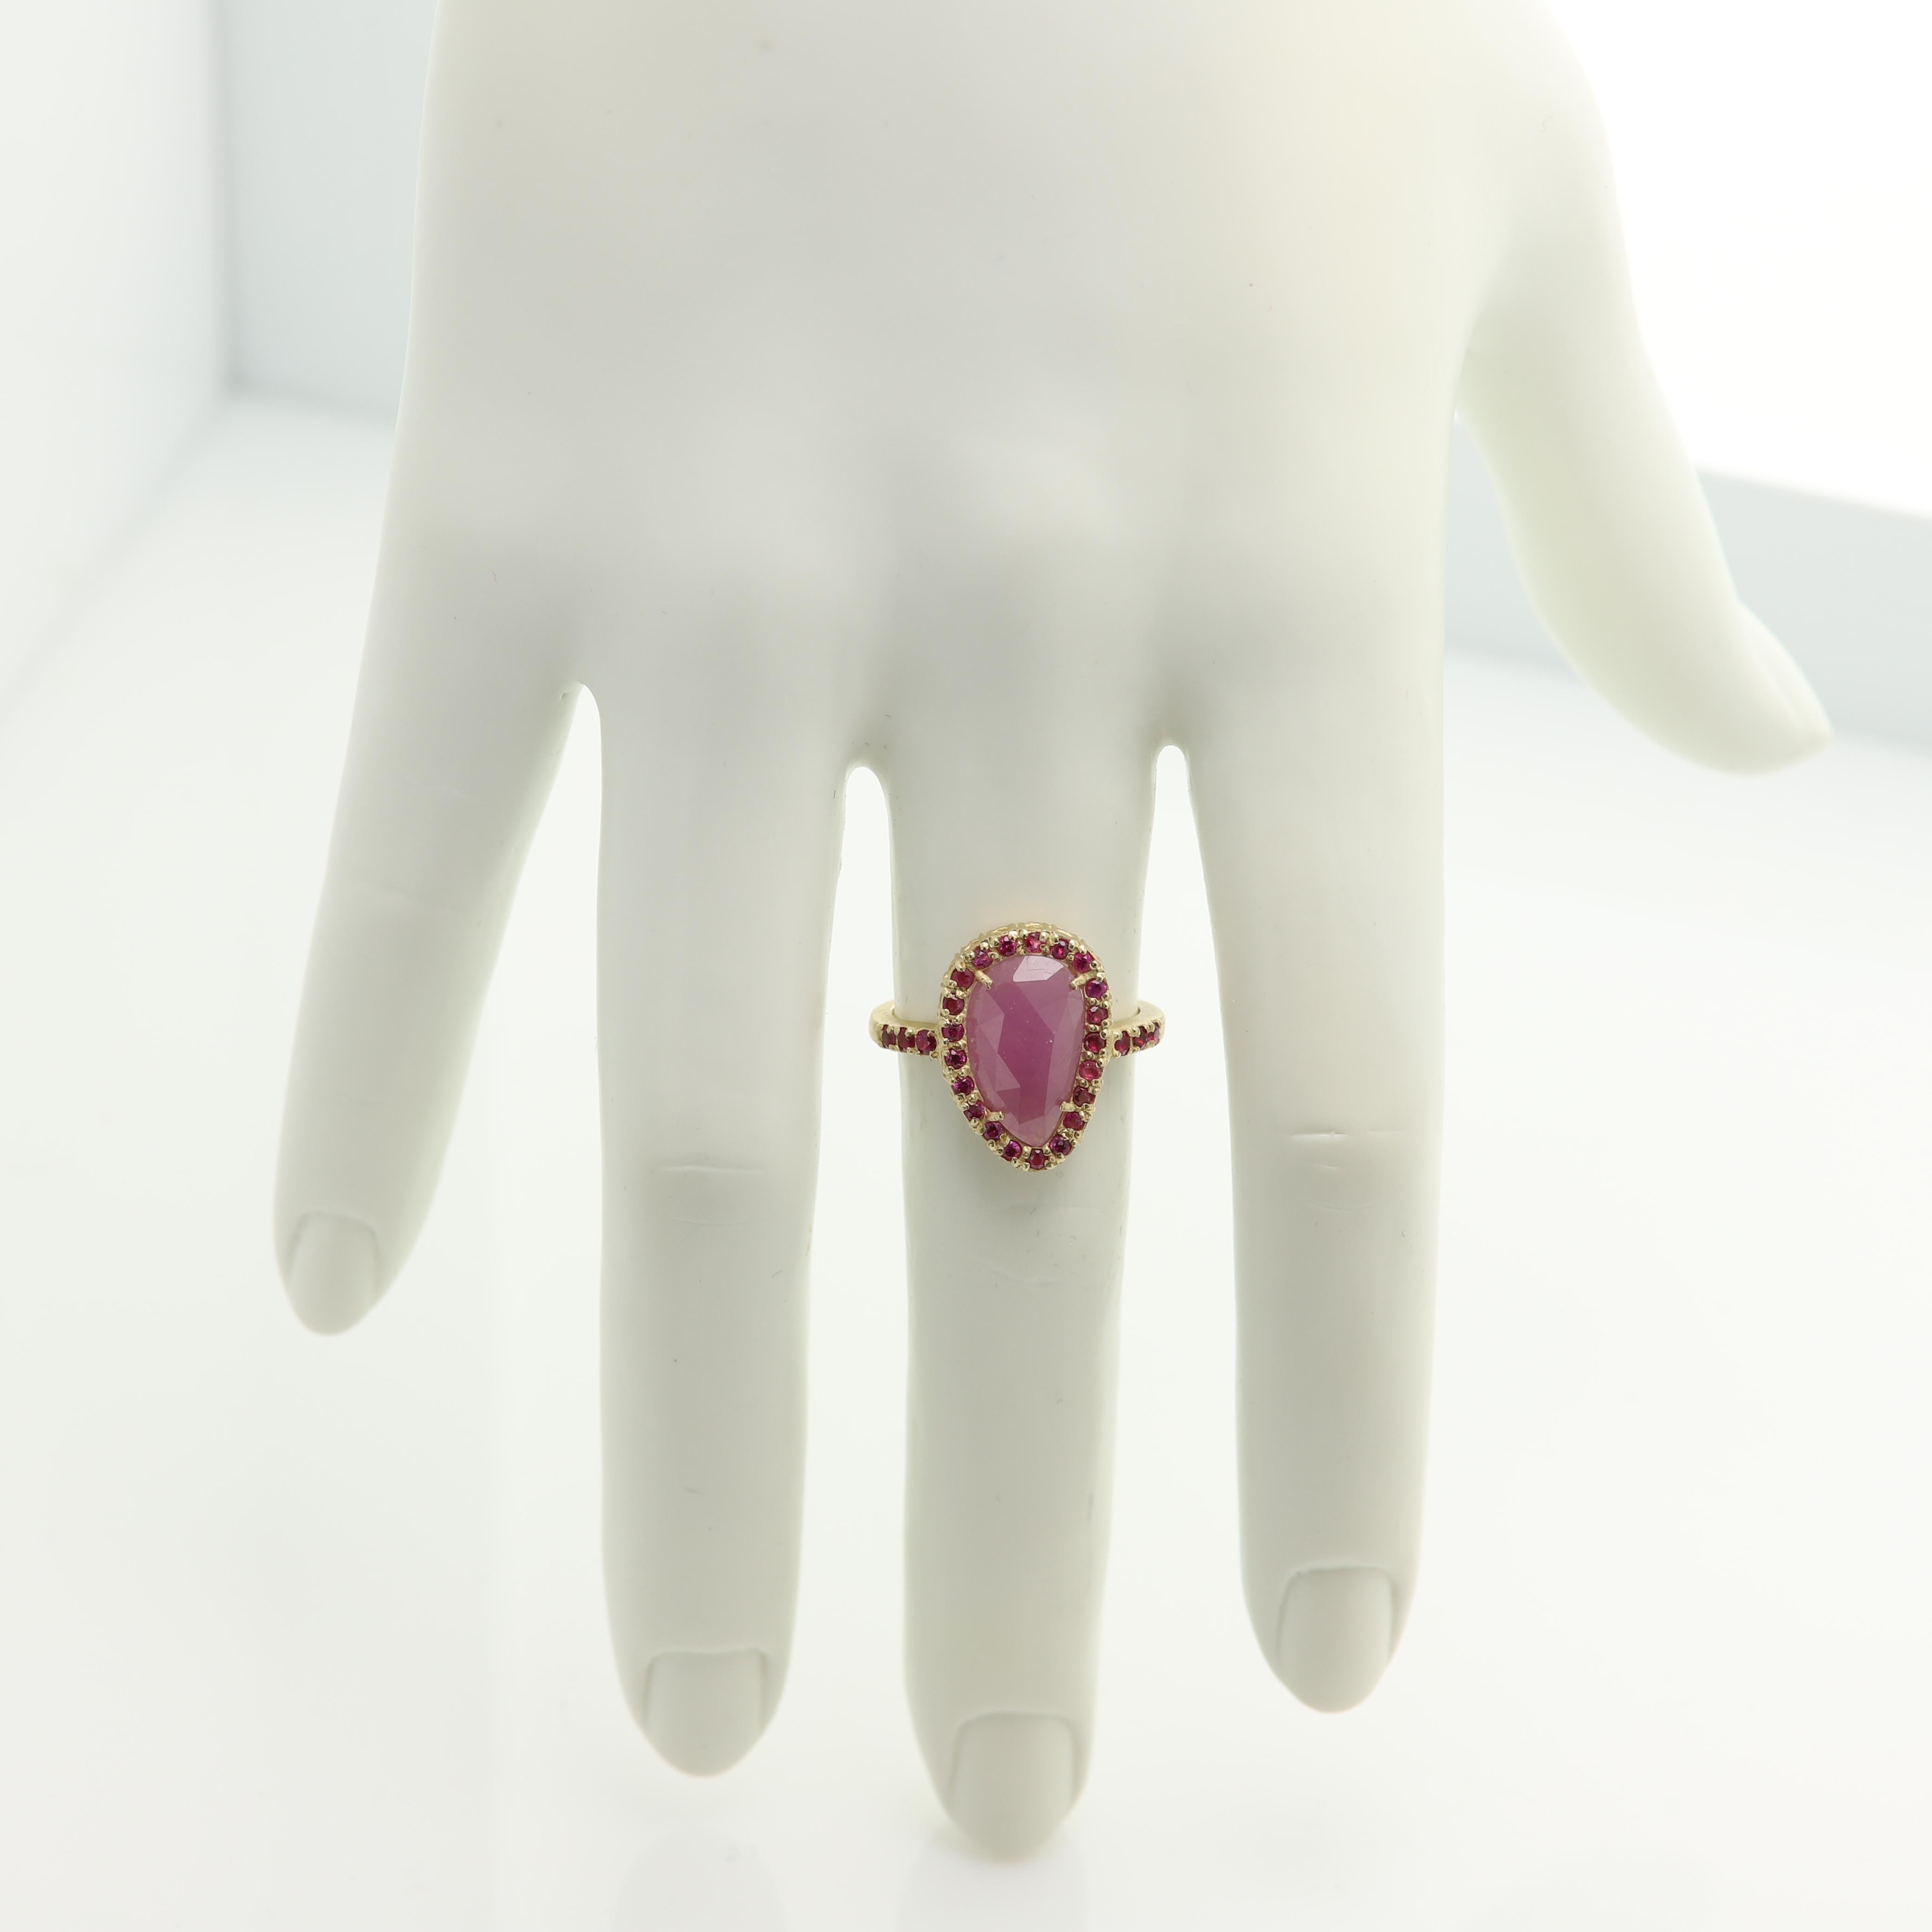 Vintage Pink Corundum (ruby family) & Red Sapphire - Hand Made in Italy
14k Yellow Gold 4.60 grams - mat finish (not shiney gold)
Round Red Sapphires 0.58 carat 
Center Corundum is a 